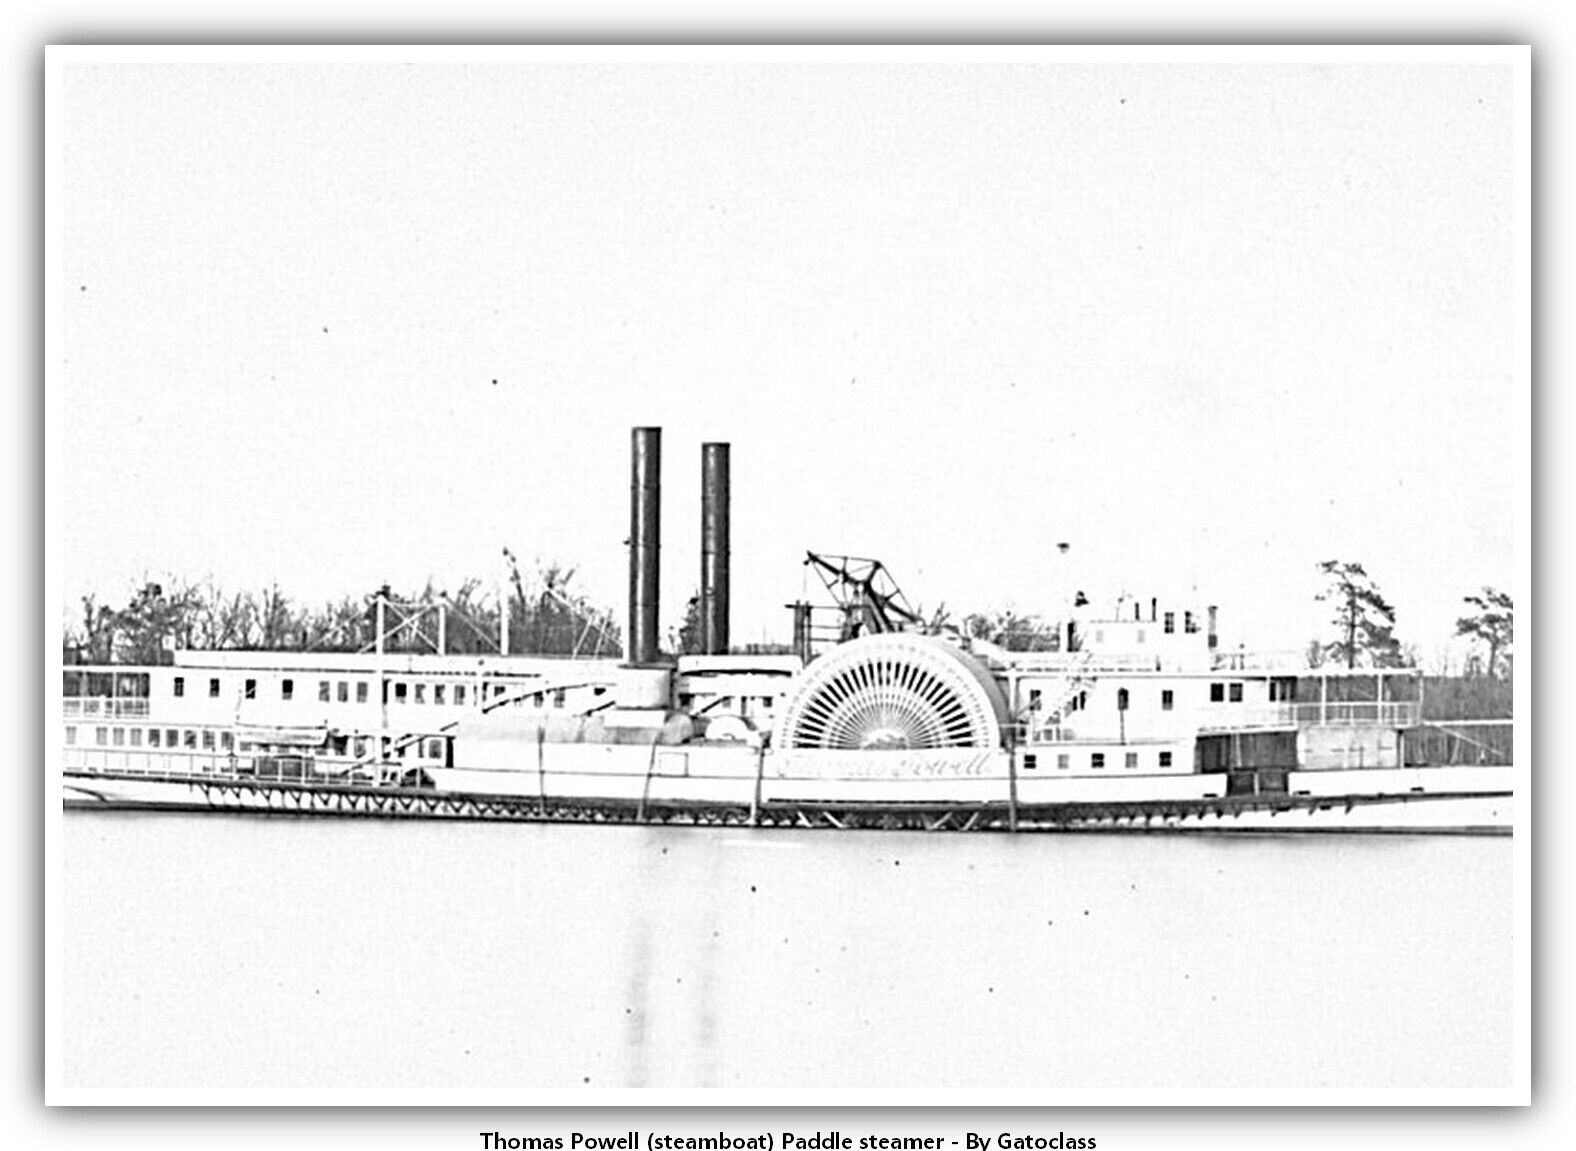 Thomas Powell (steamboat) Paddle steamer_issue3